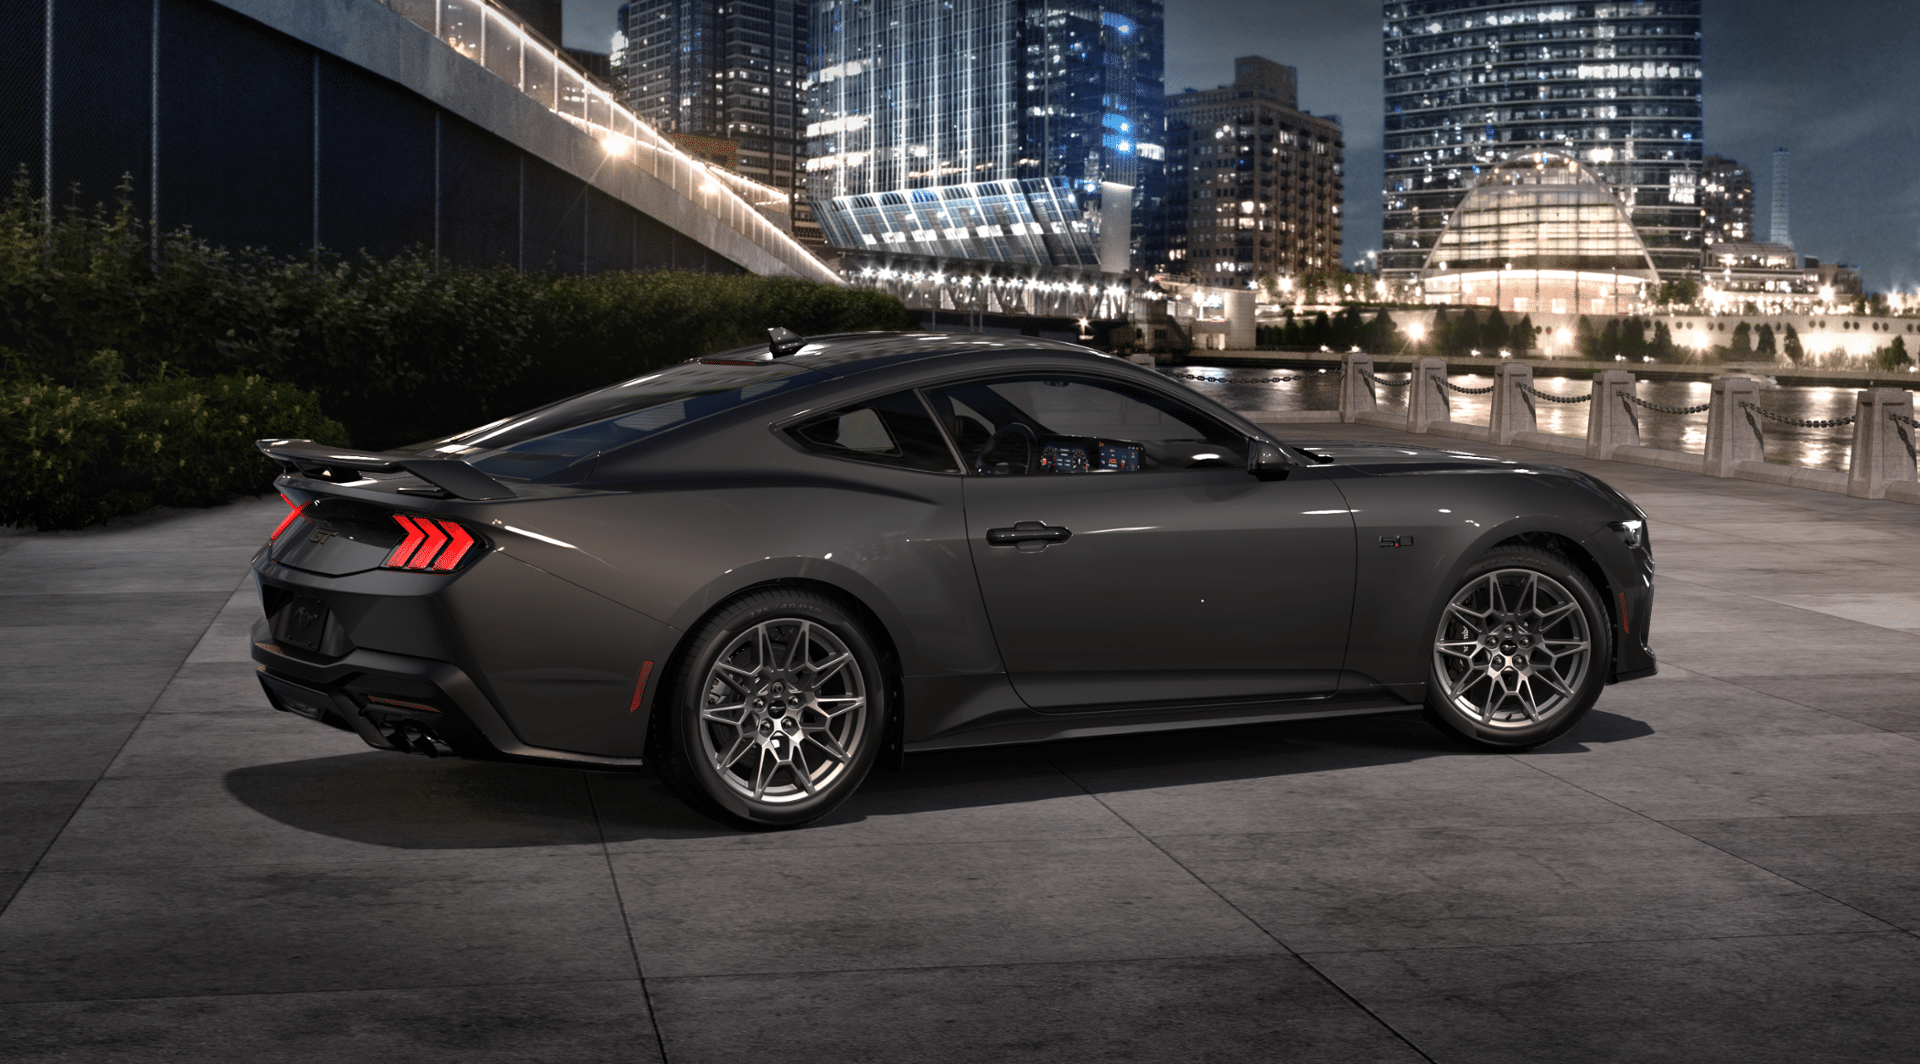 S650 Mustang 2024 Mustang Build & Price Configurator UPDATED!! [New Images] 1688155788349